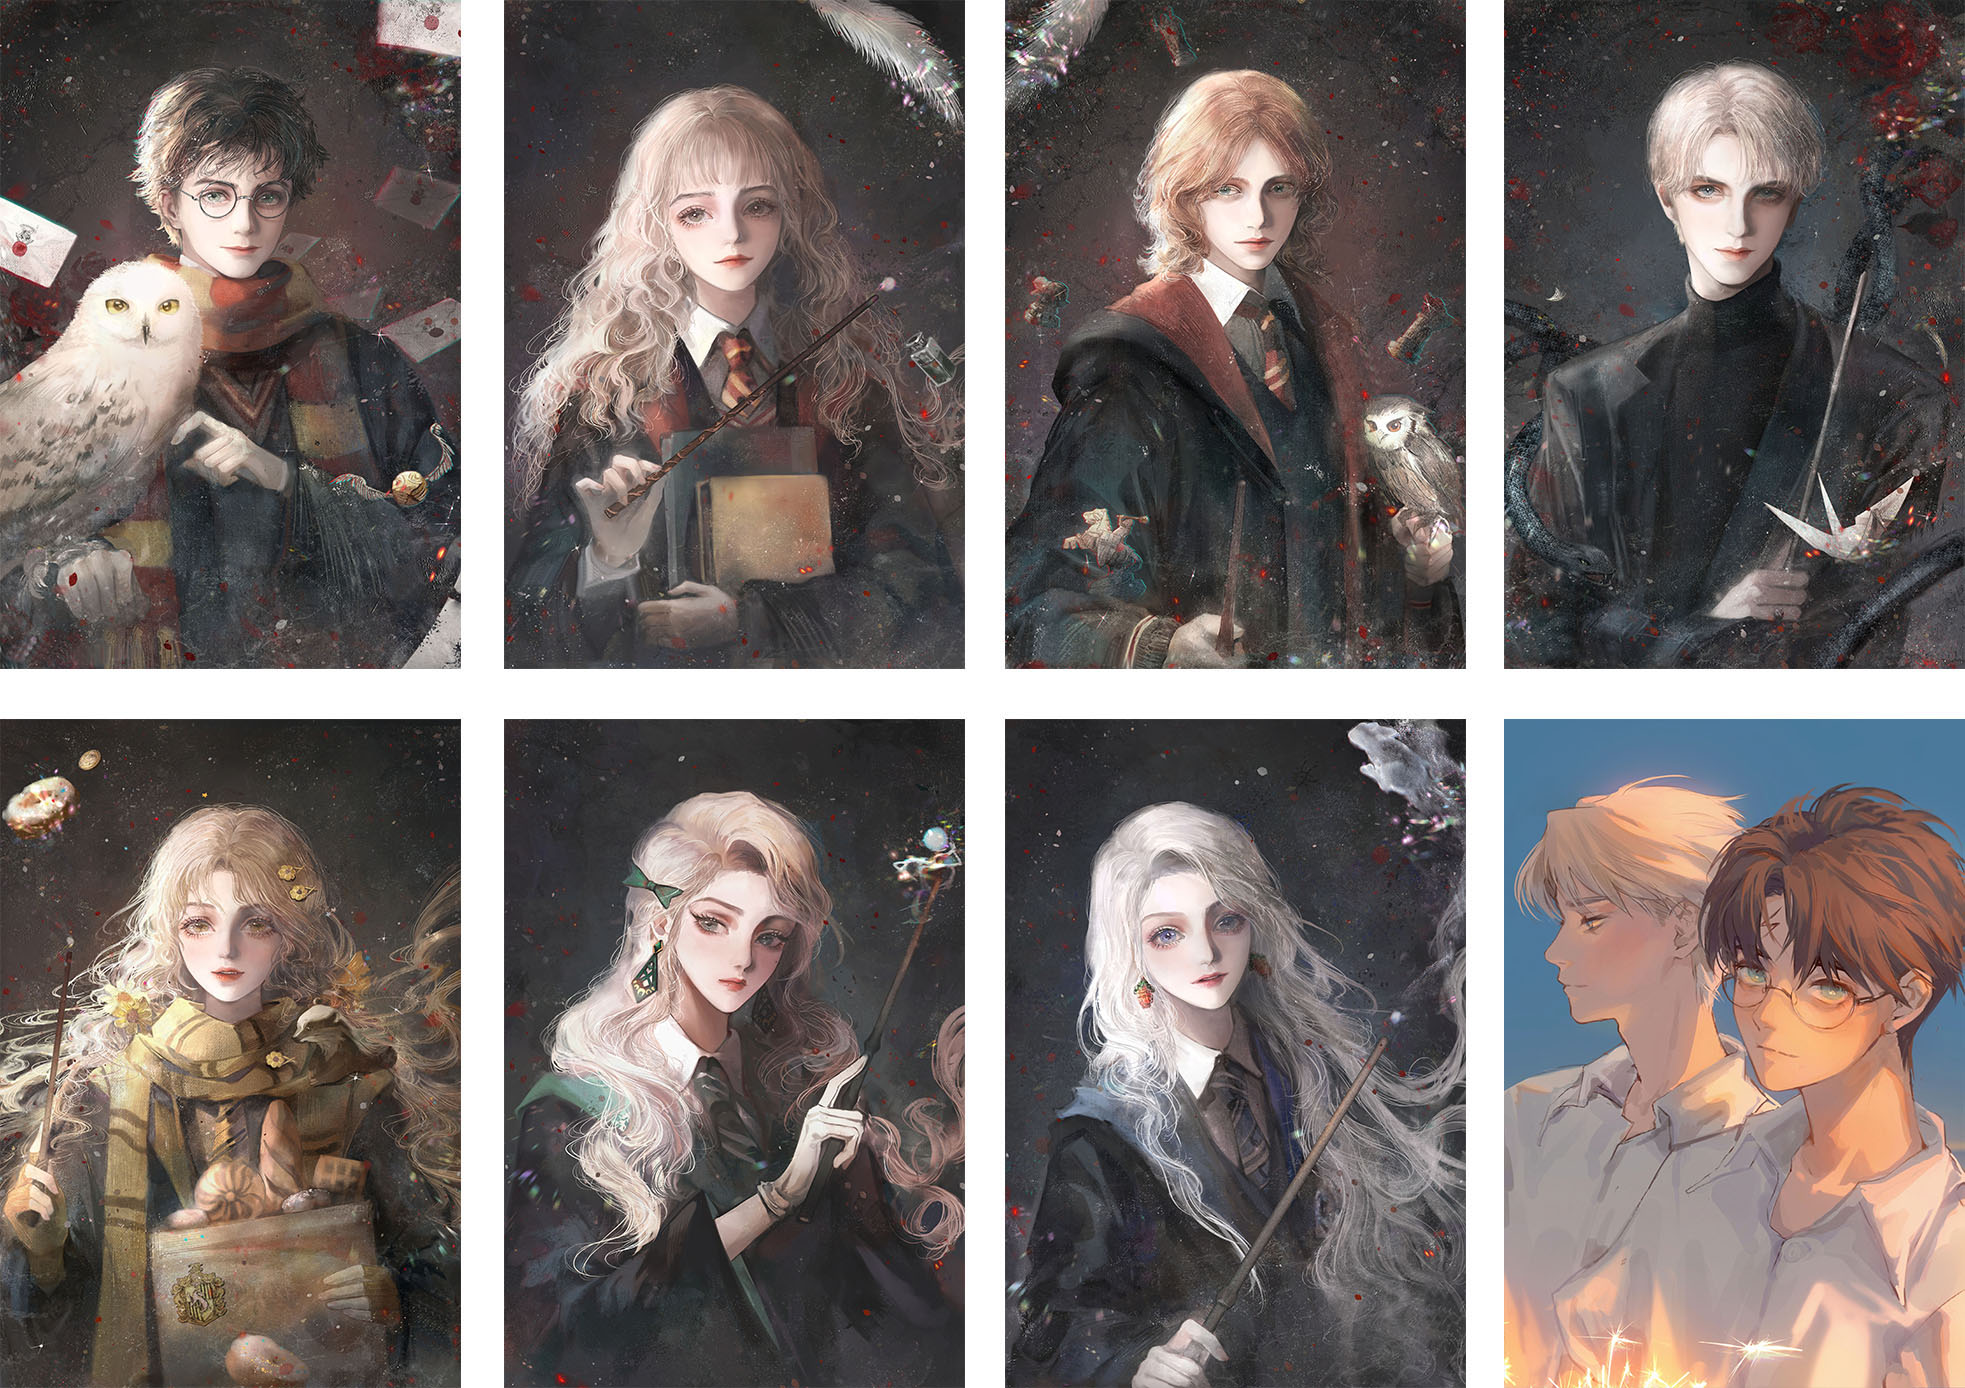 Harry Potter anime posters price for a set of 8 pcs